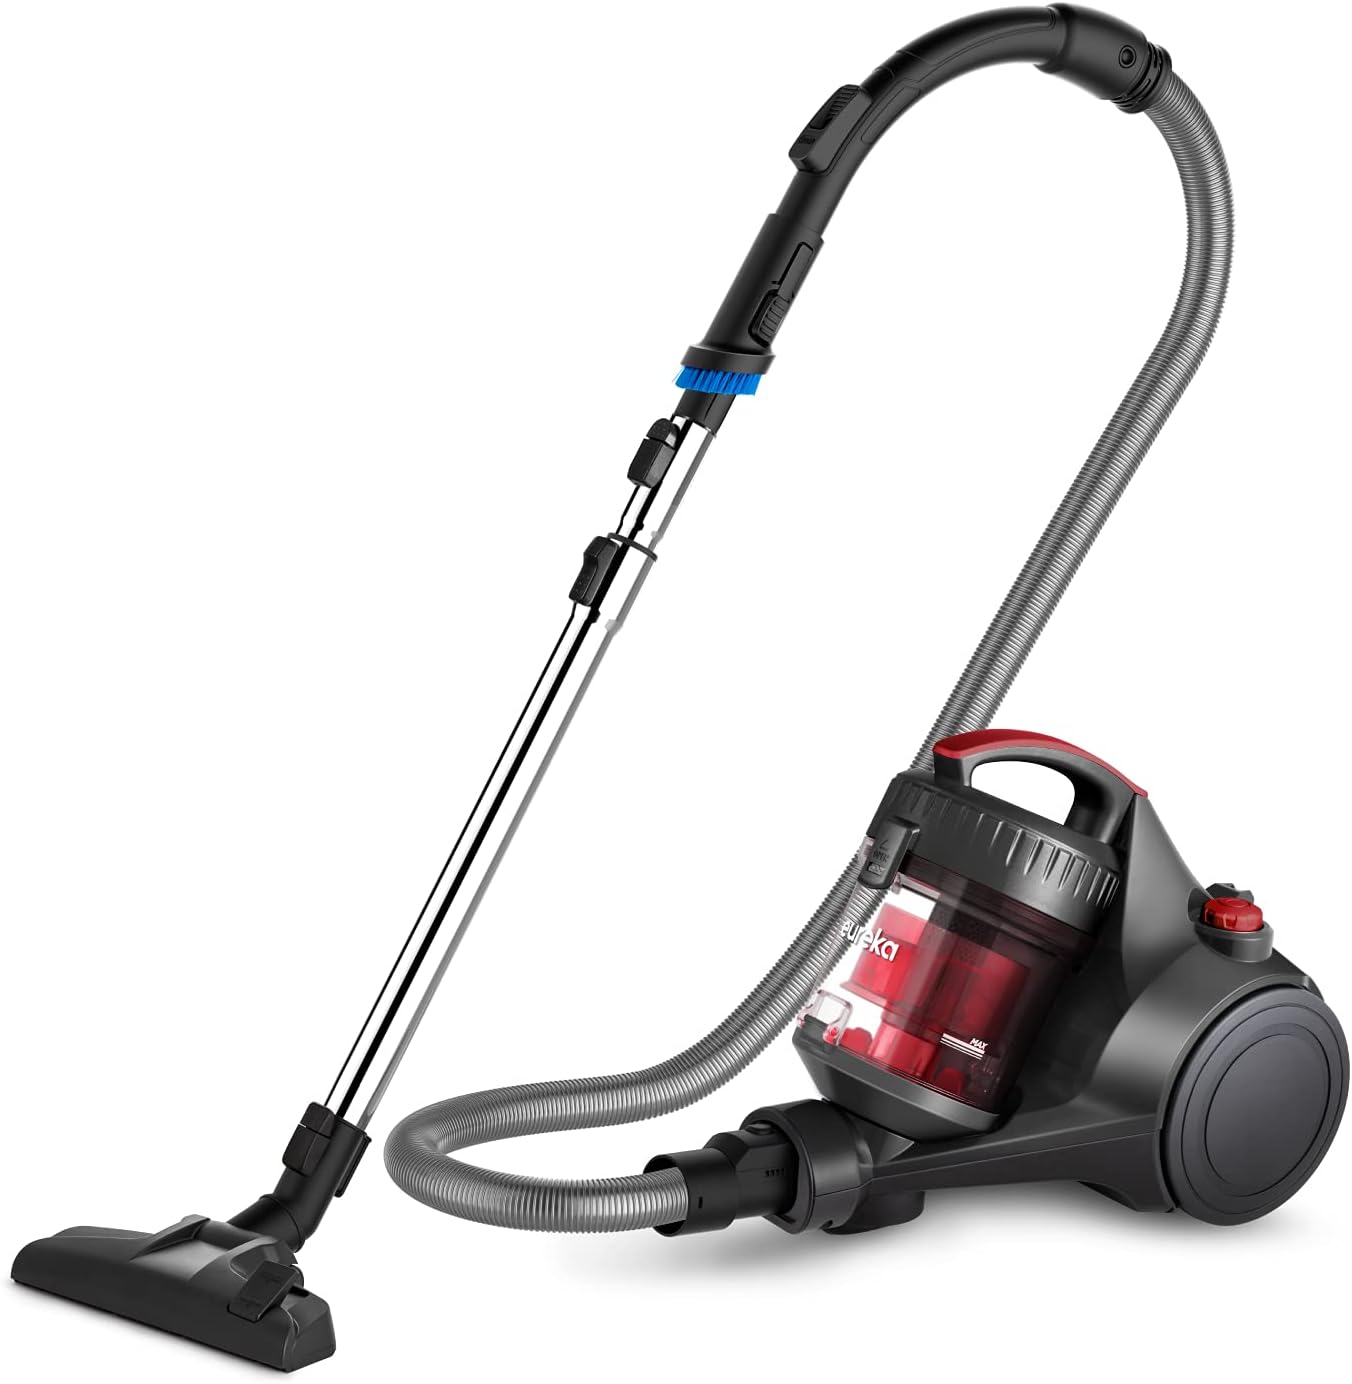 https://bigbigmart.com/wp-content/uploads/2023/09/EUREKA-Whirlwind-Bagless-Canister-Vacuum-Cleaner-Lightweight-Vac-for-Carpets-and-Hard-Floors-Red.jpg